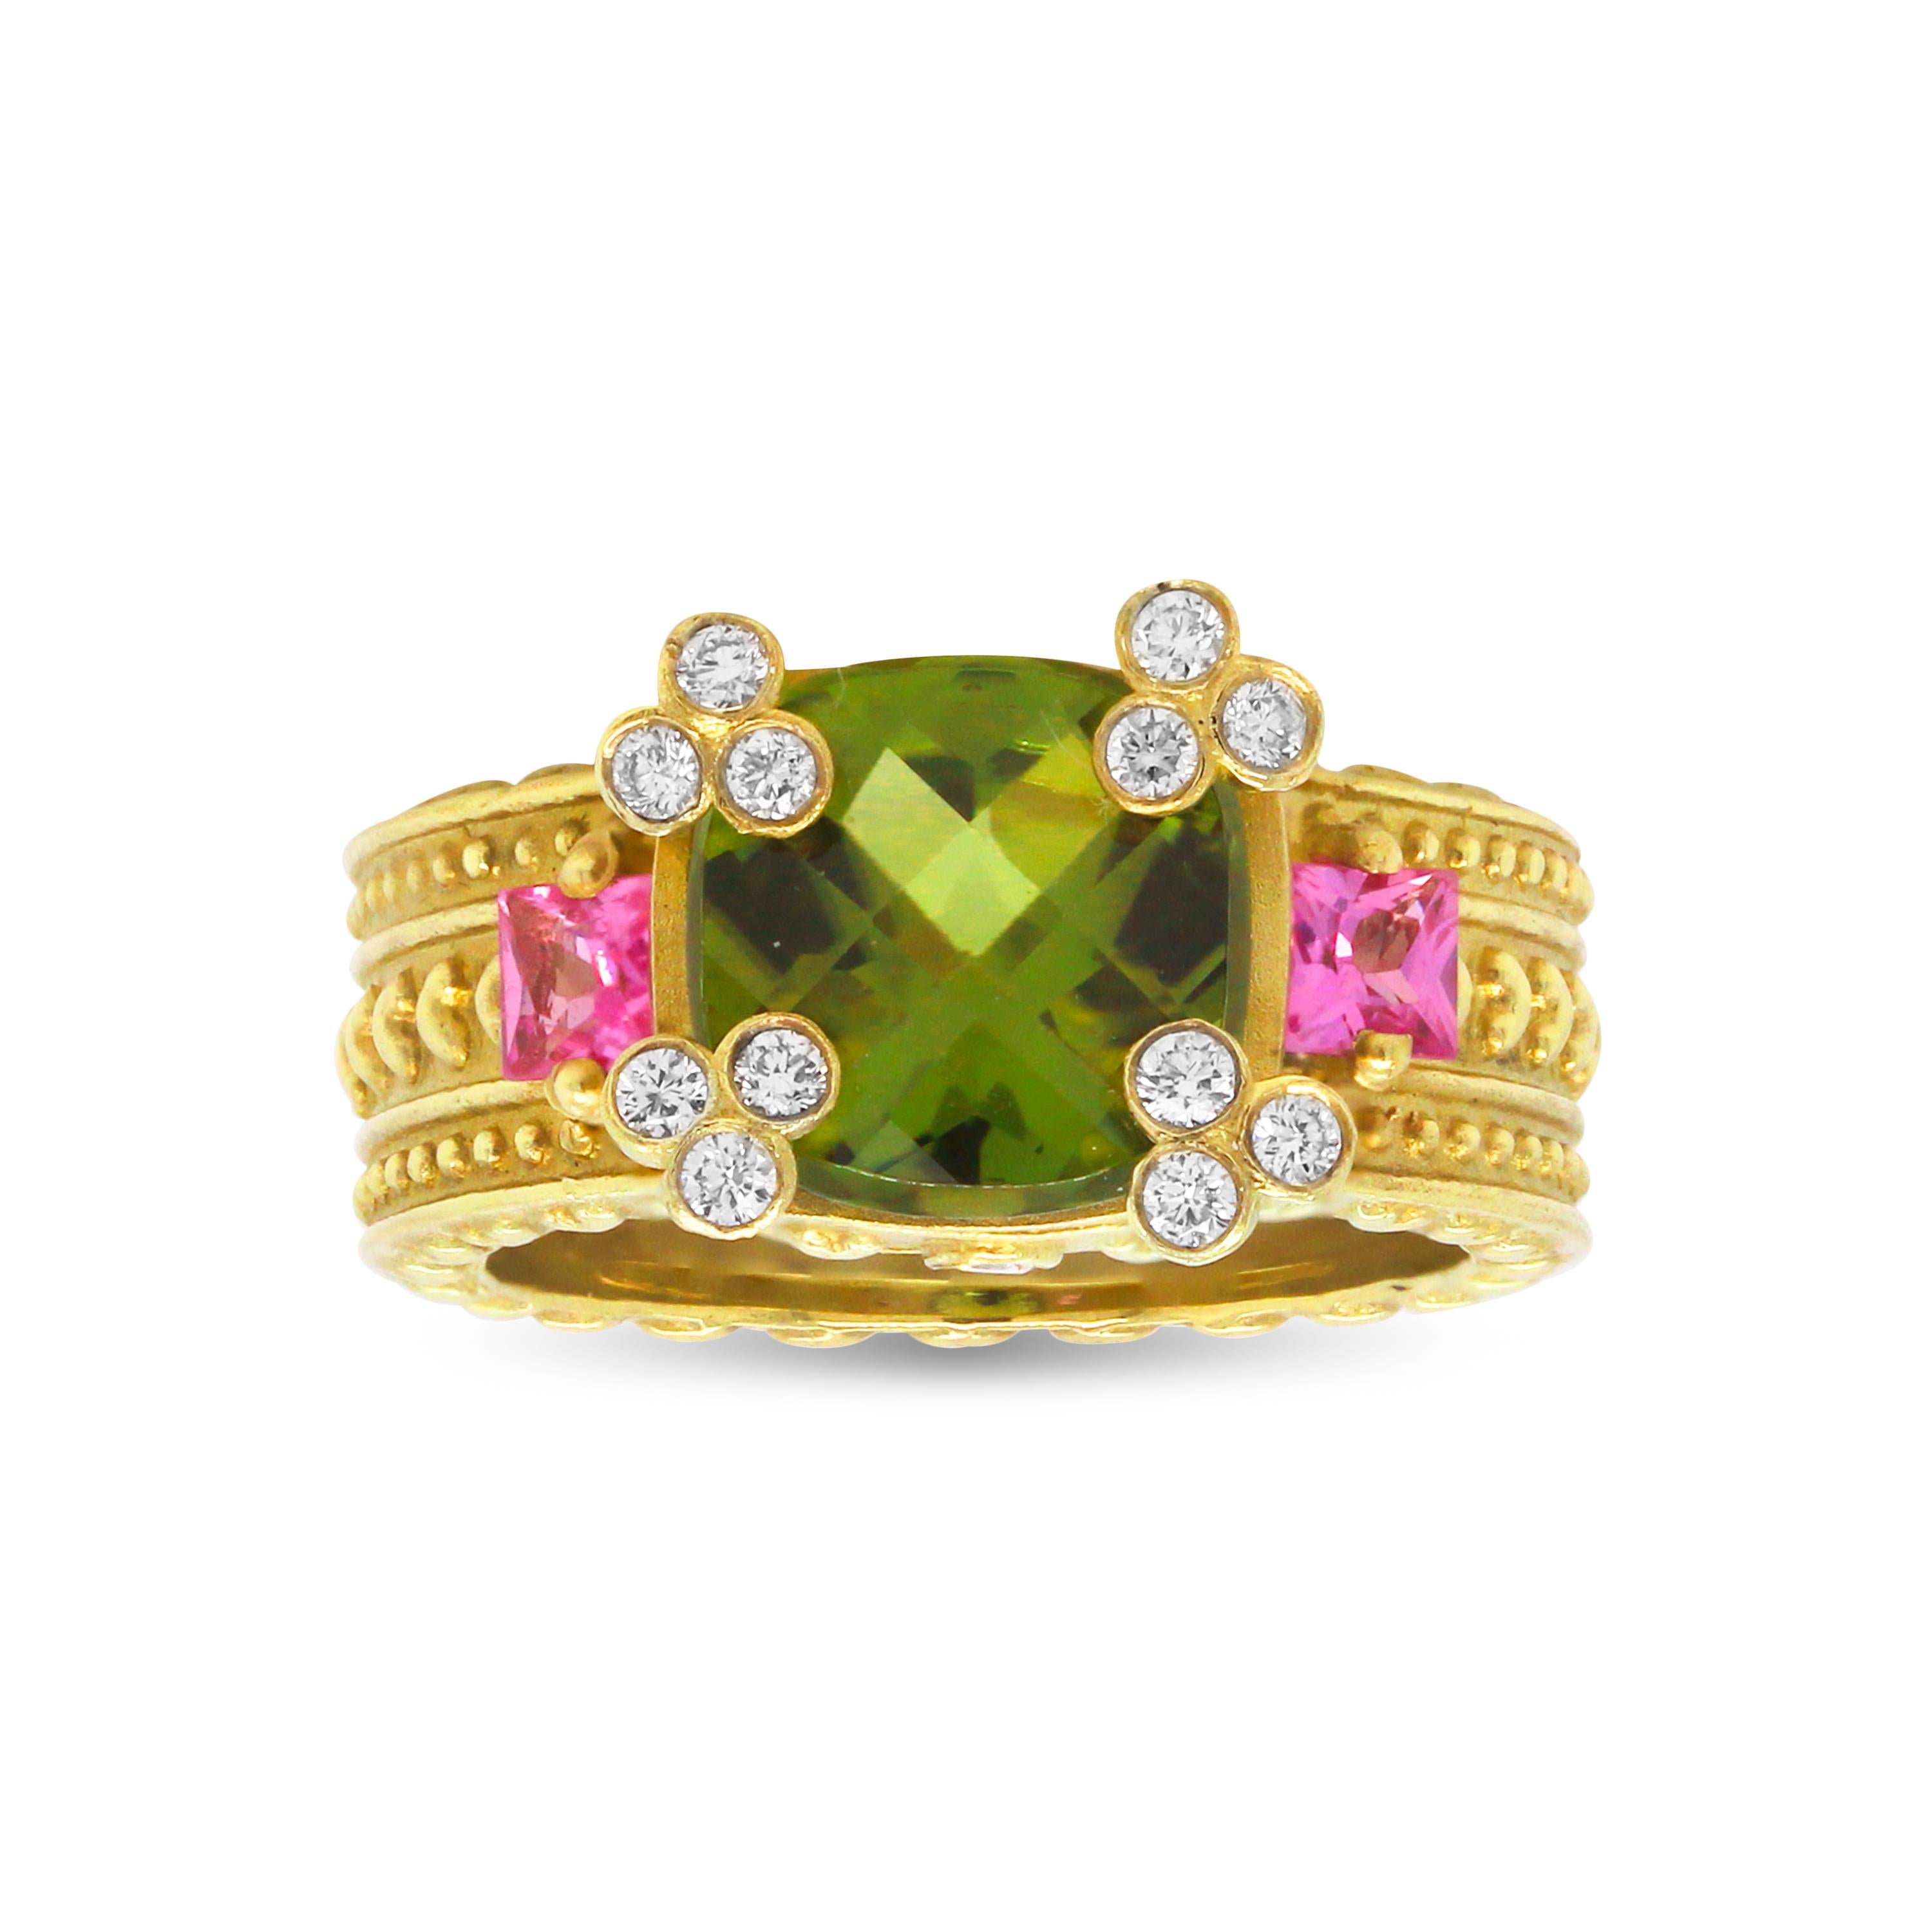 Stambolian 18K Yellow Gold Diamond Peridot Pink Sapphire Heart Band Cocktail Ring

This fun ring features a Peridot center with two Pink Sapphires on both sides. The band is done entirely with hearts which adds a cute detail to this design.

Peridot